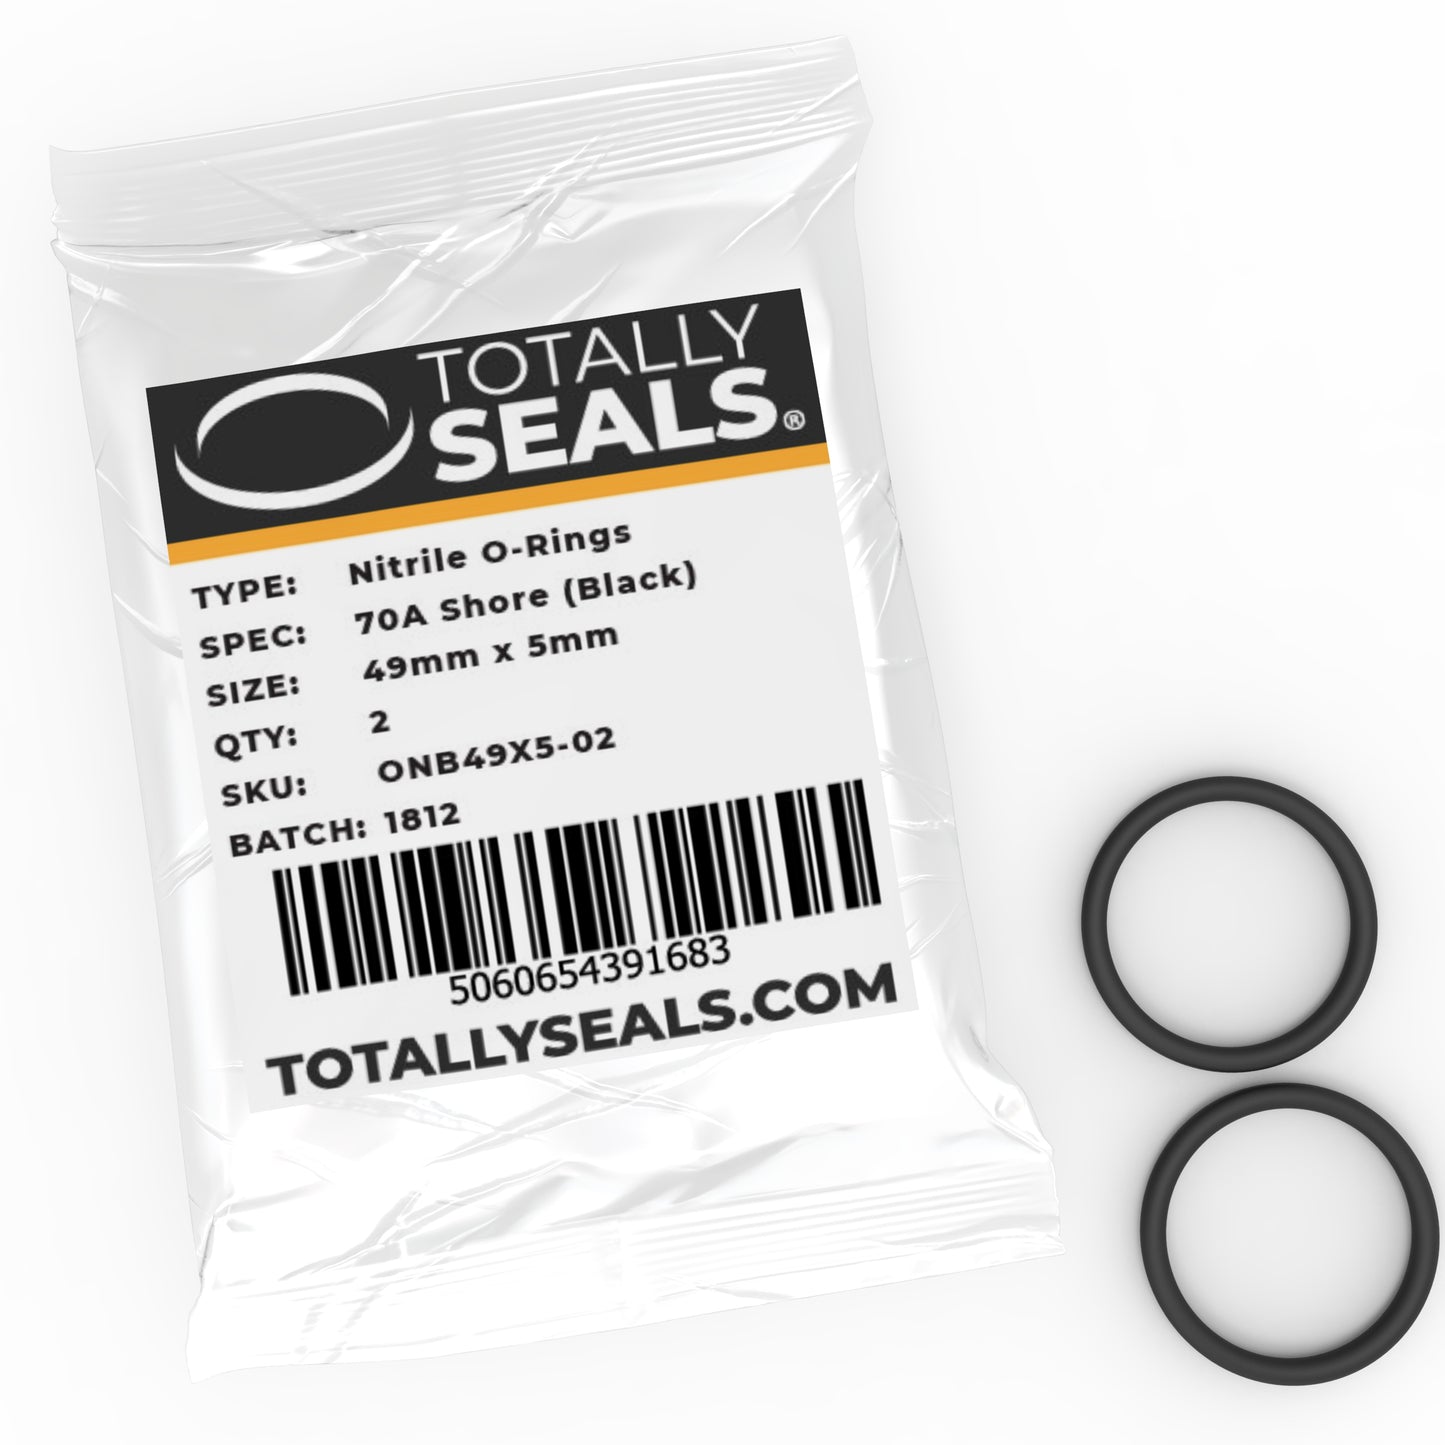 49mm x 5mm (59mm OD) Nitrile O-Rings - Totally Seals®